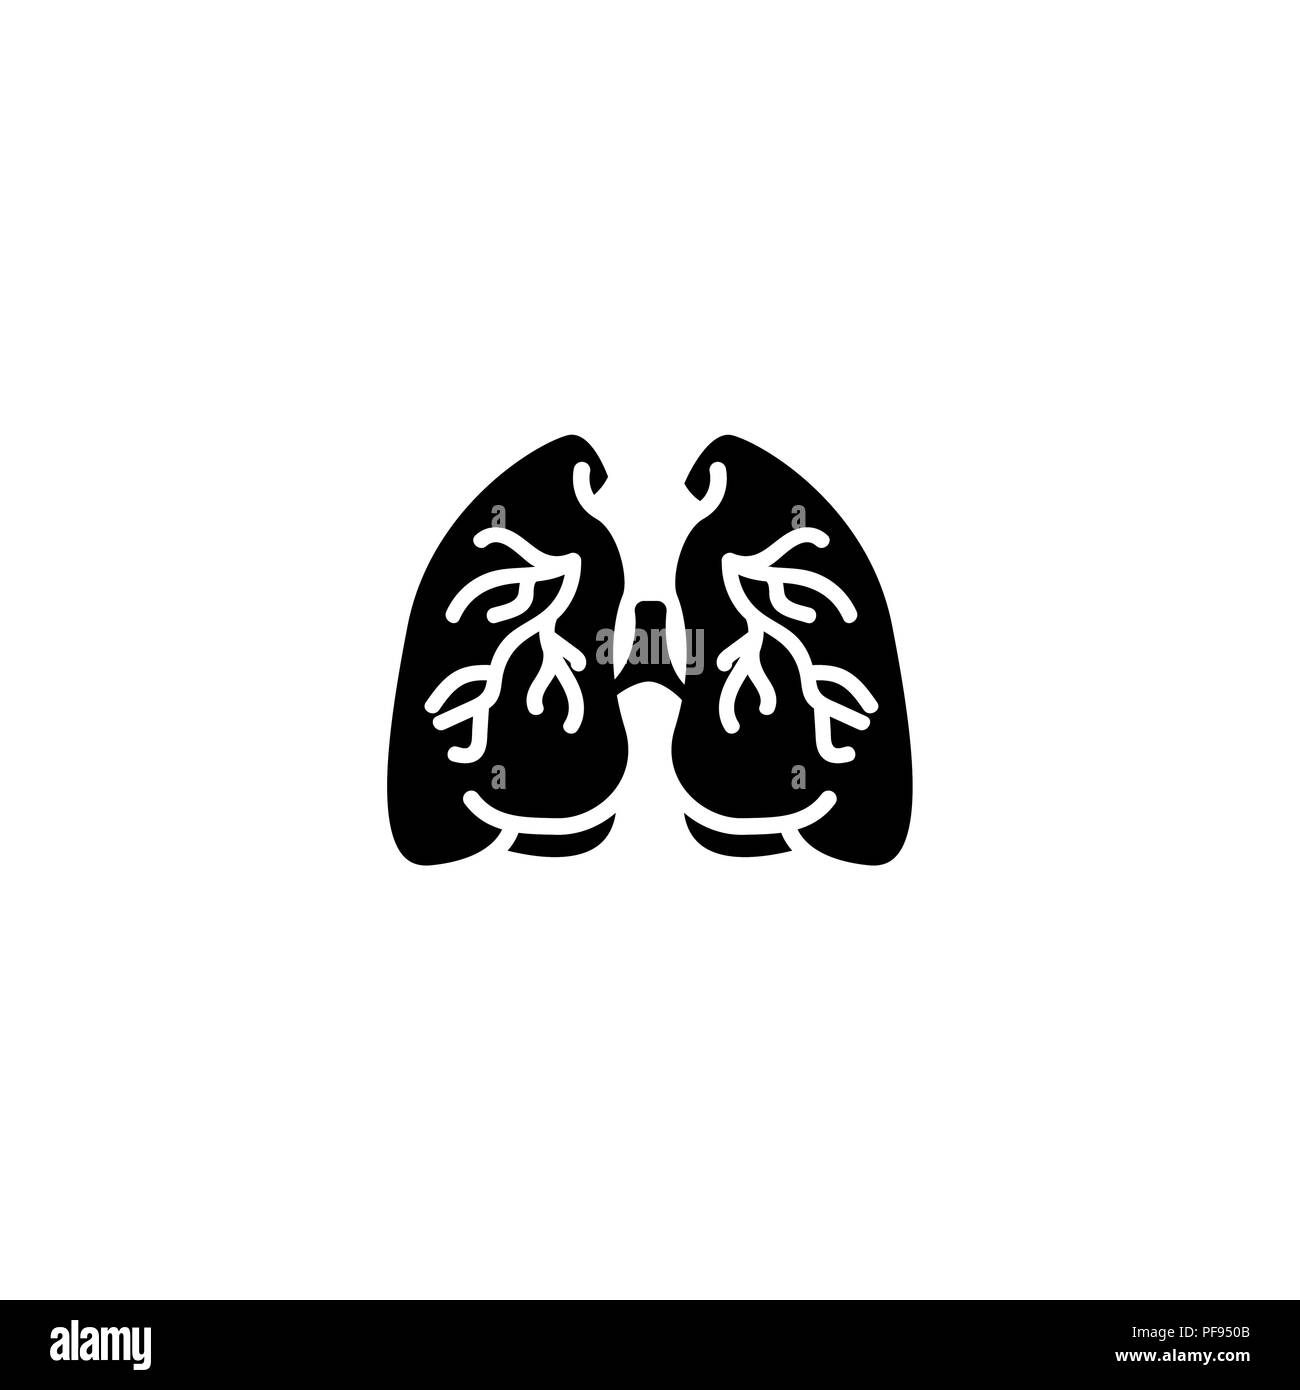 Web icon. Lungs. vector illustration black on white background Stock Vector